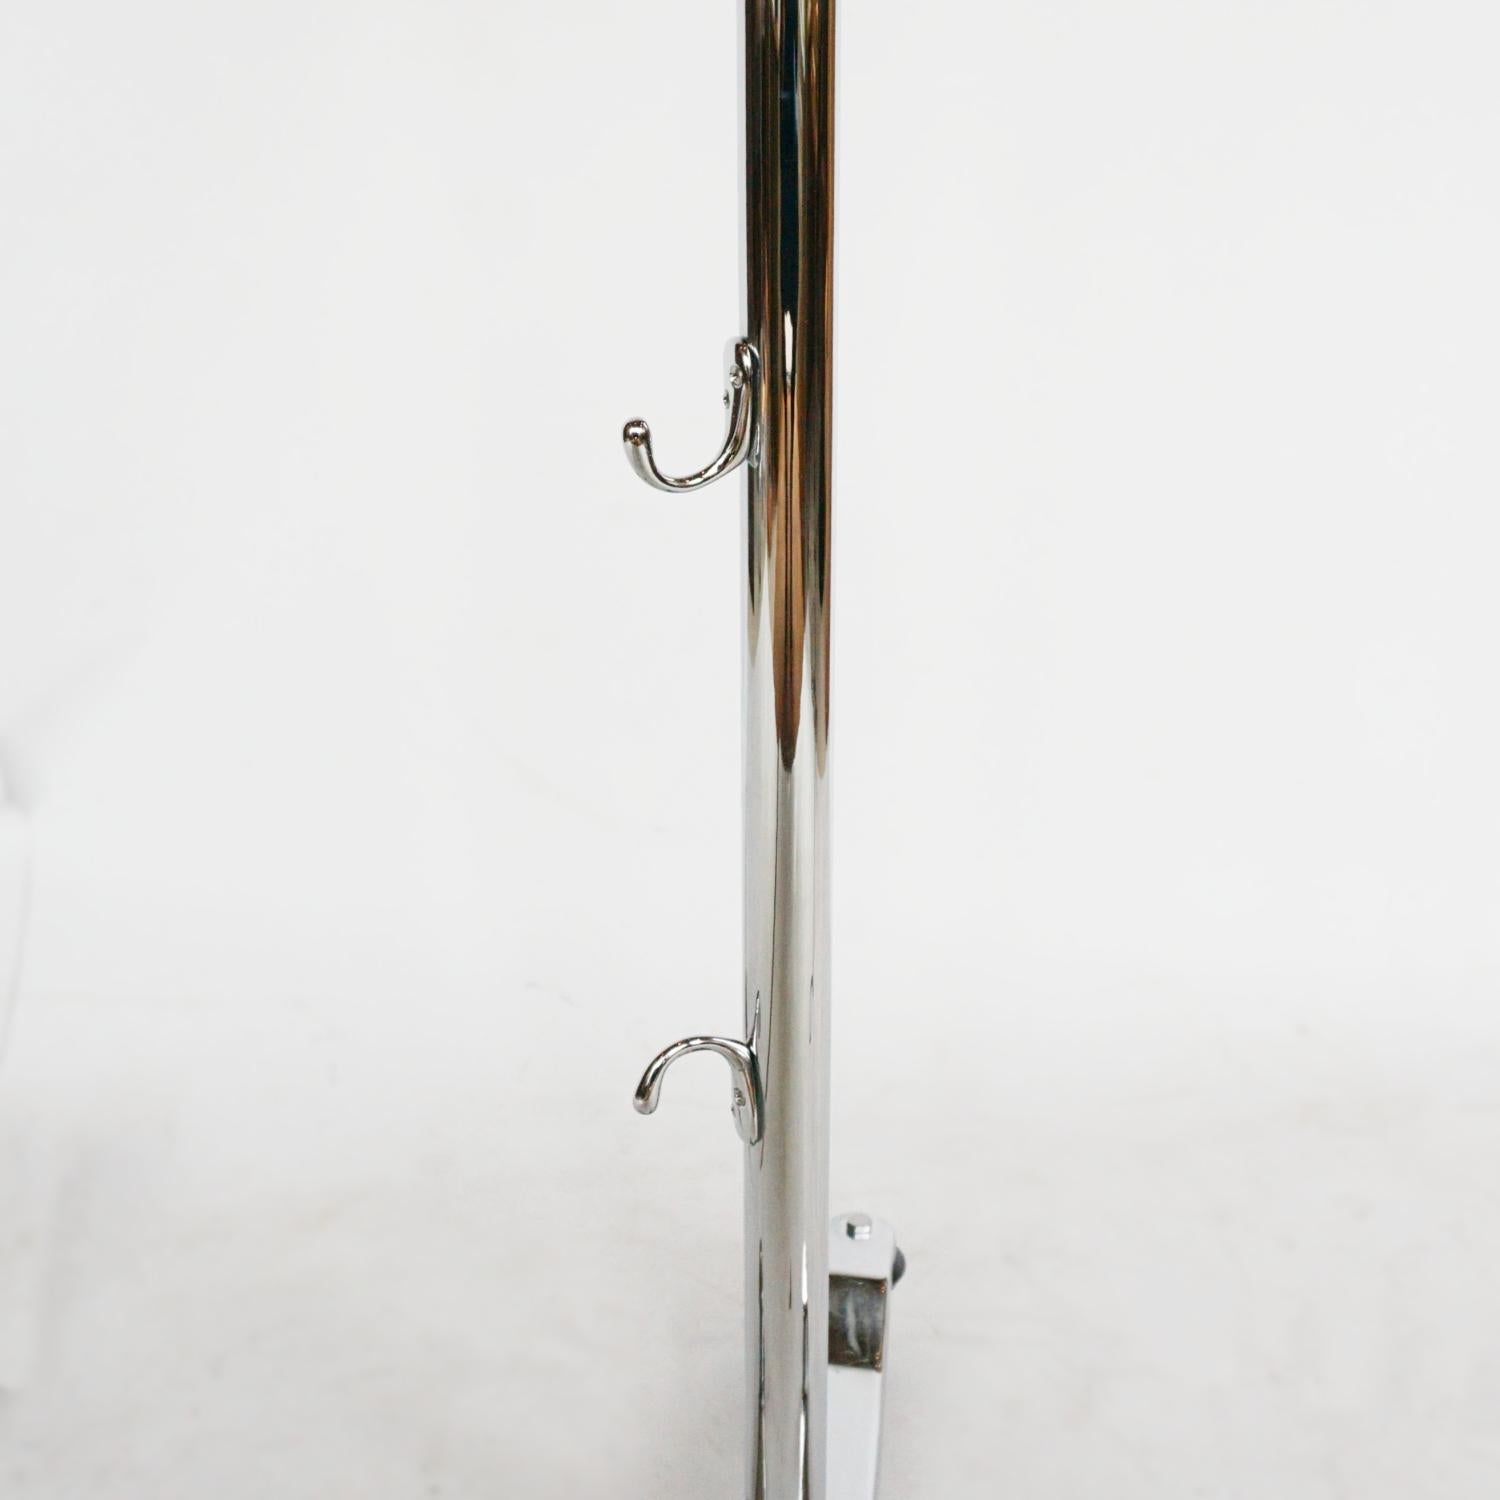 A rare Horstmann roller trolley lamp. Earlier prototype/model. Original components with original trolley and wheels. Chromed metal, stamped Horstmann to roller mechanism. 

Dimensions: H 212cm fully extended. W/D of base 43cm 

Origin: